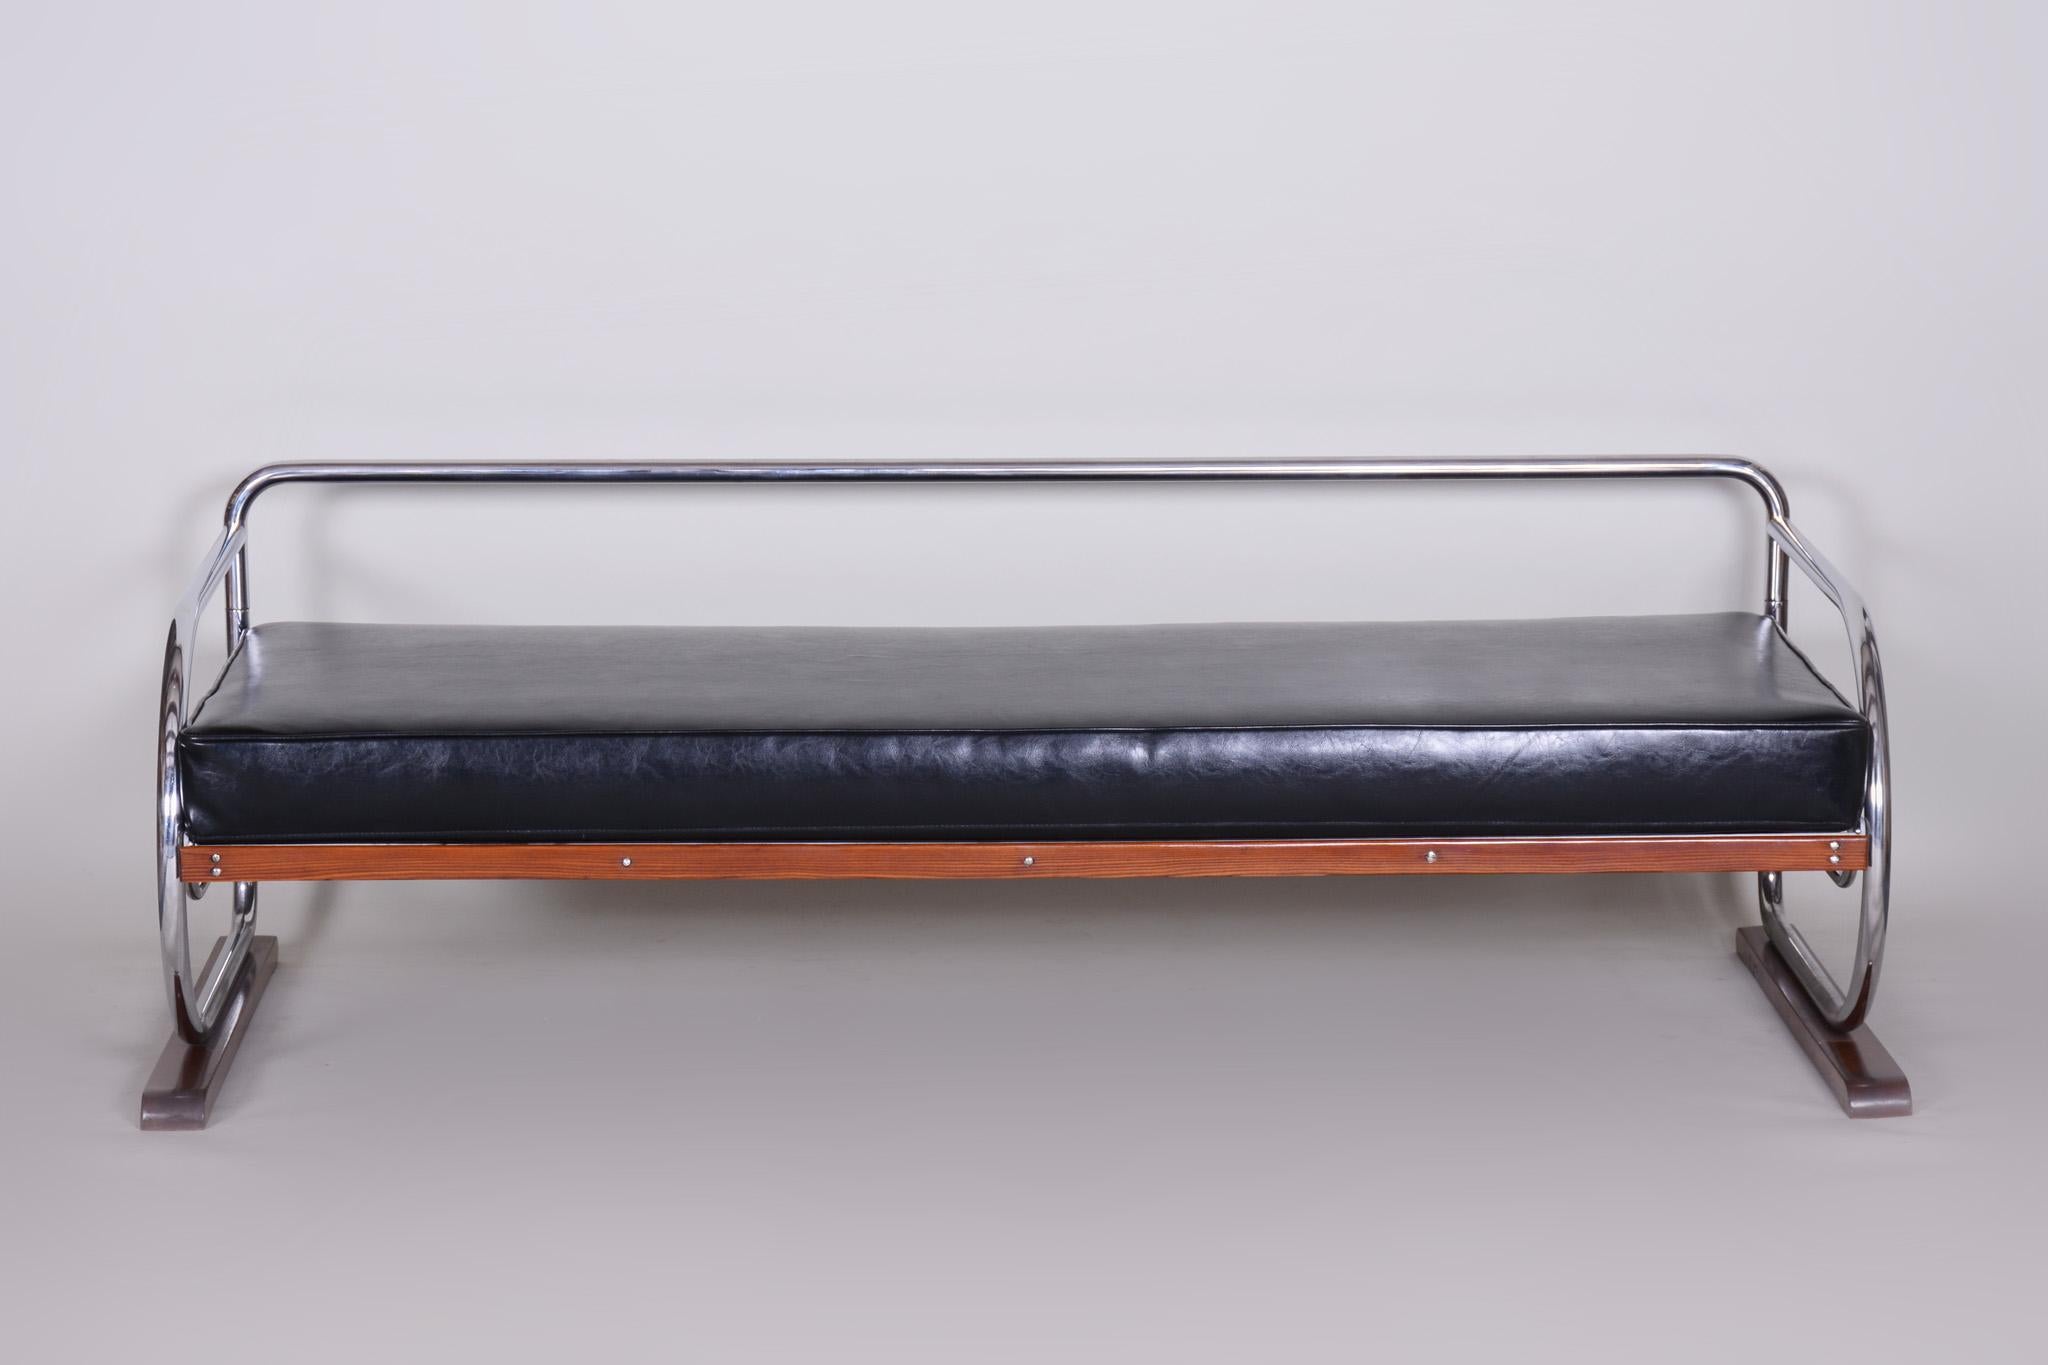 Bauhaus style sofa with a lacquered wood and chrome tubular steel frame.
Manufactured by Robert Slezák in the 1930s.
Chrome tubular steel is in perfect original condition.
Upholstered to high quality Black leather.
Source: Czechoslovakia.